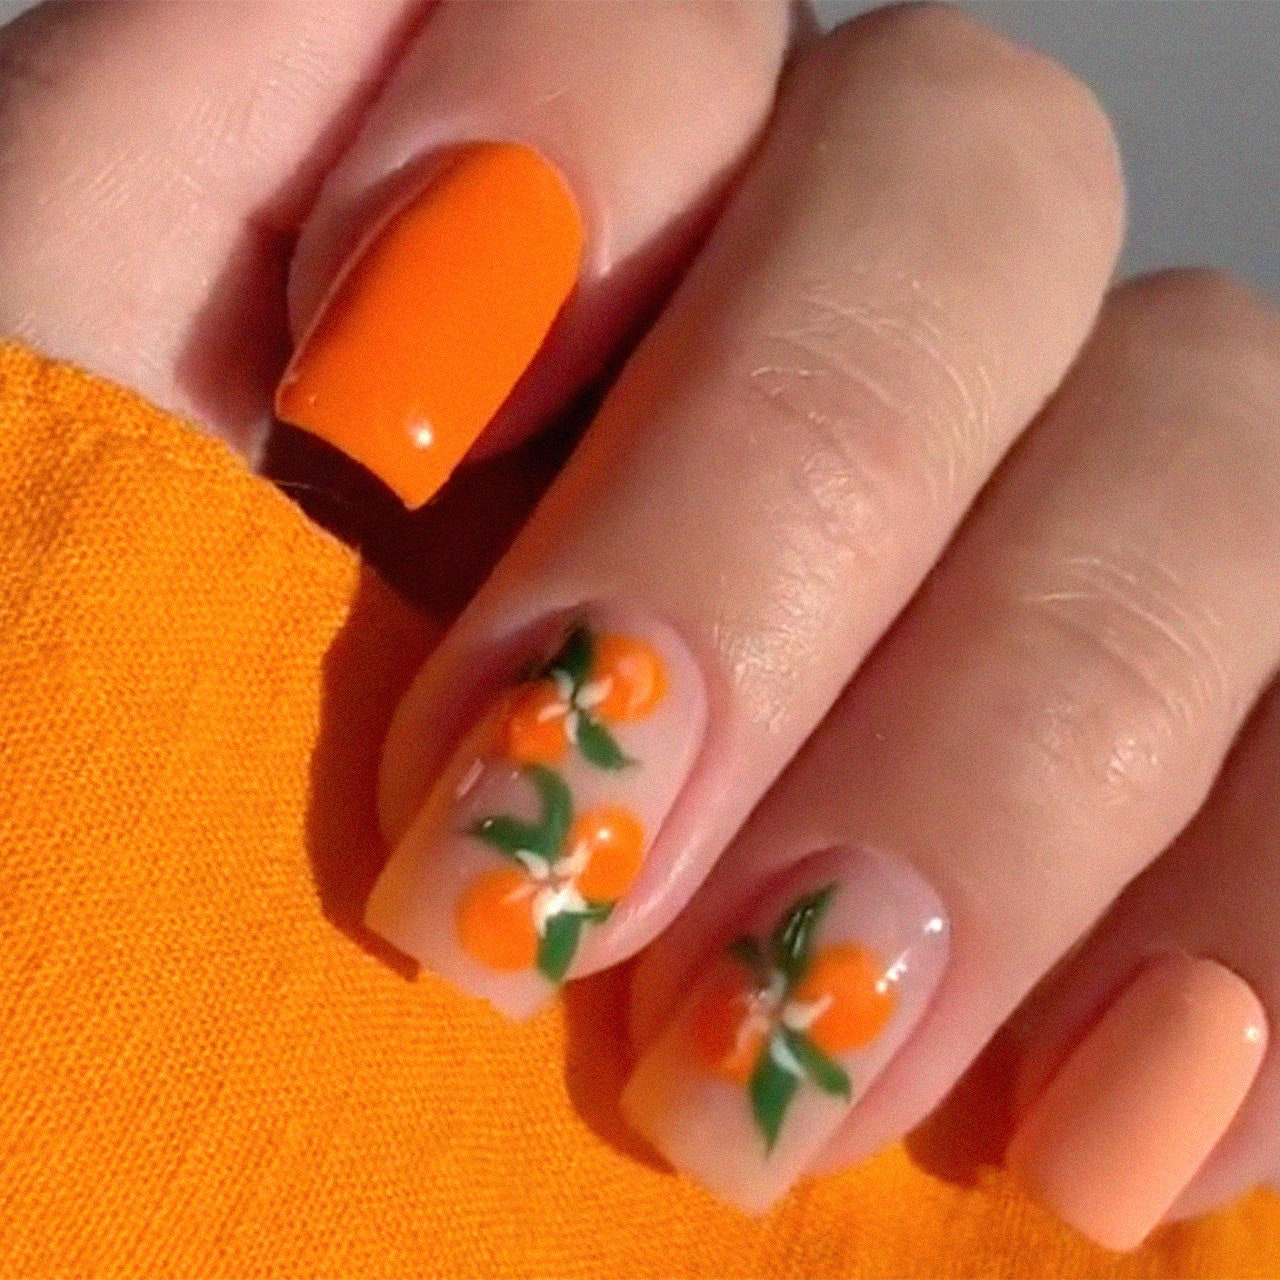 Citrus nails is the fresh manicure trending in the heatwave